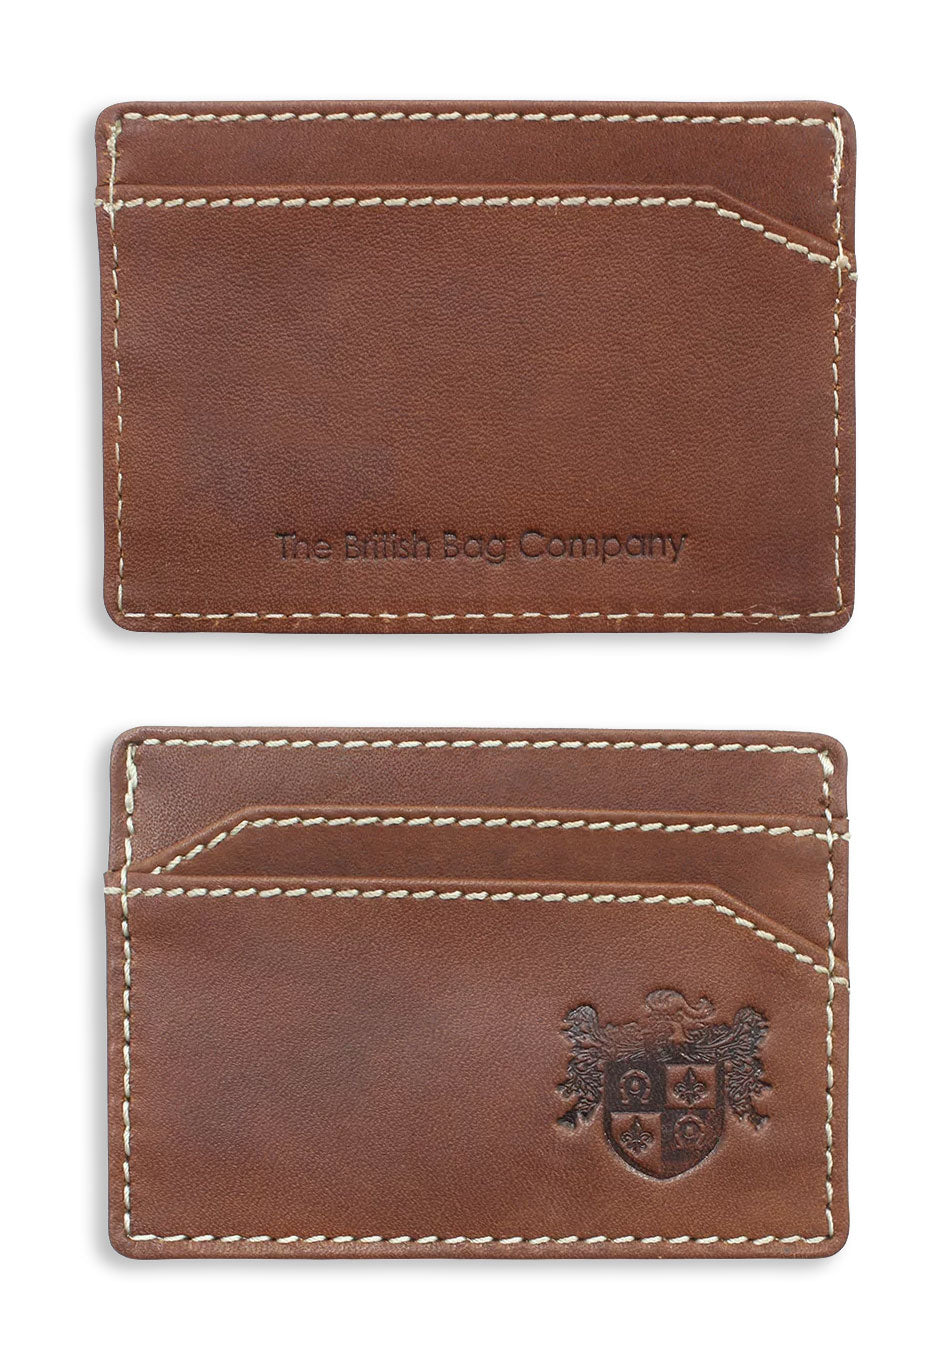 British Bag Company Pull up Leather Card Holder | Brown